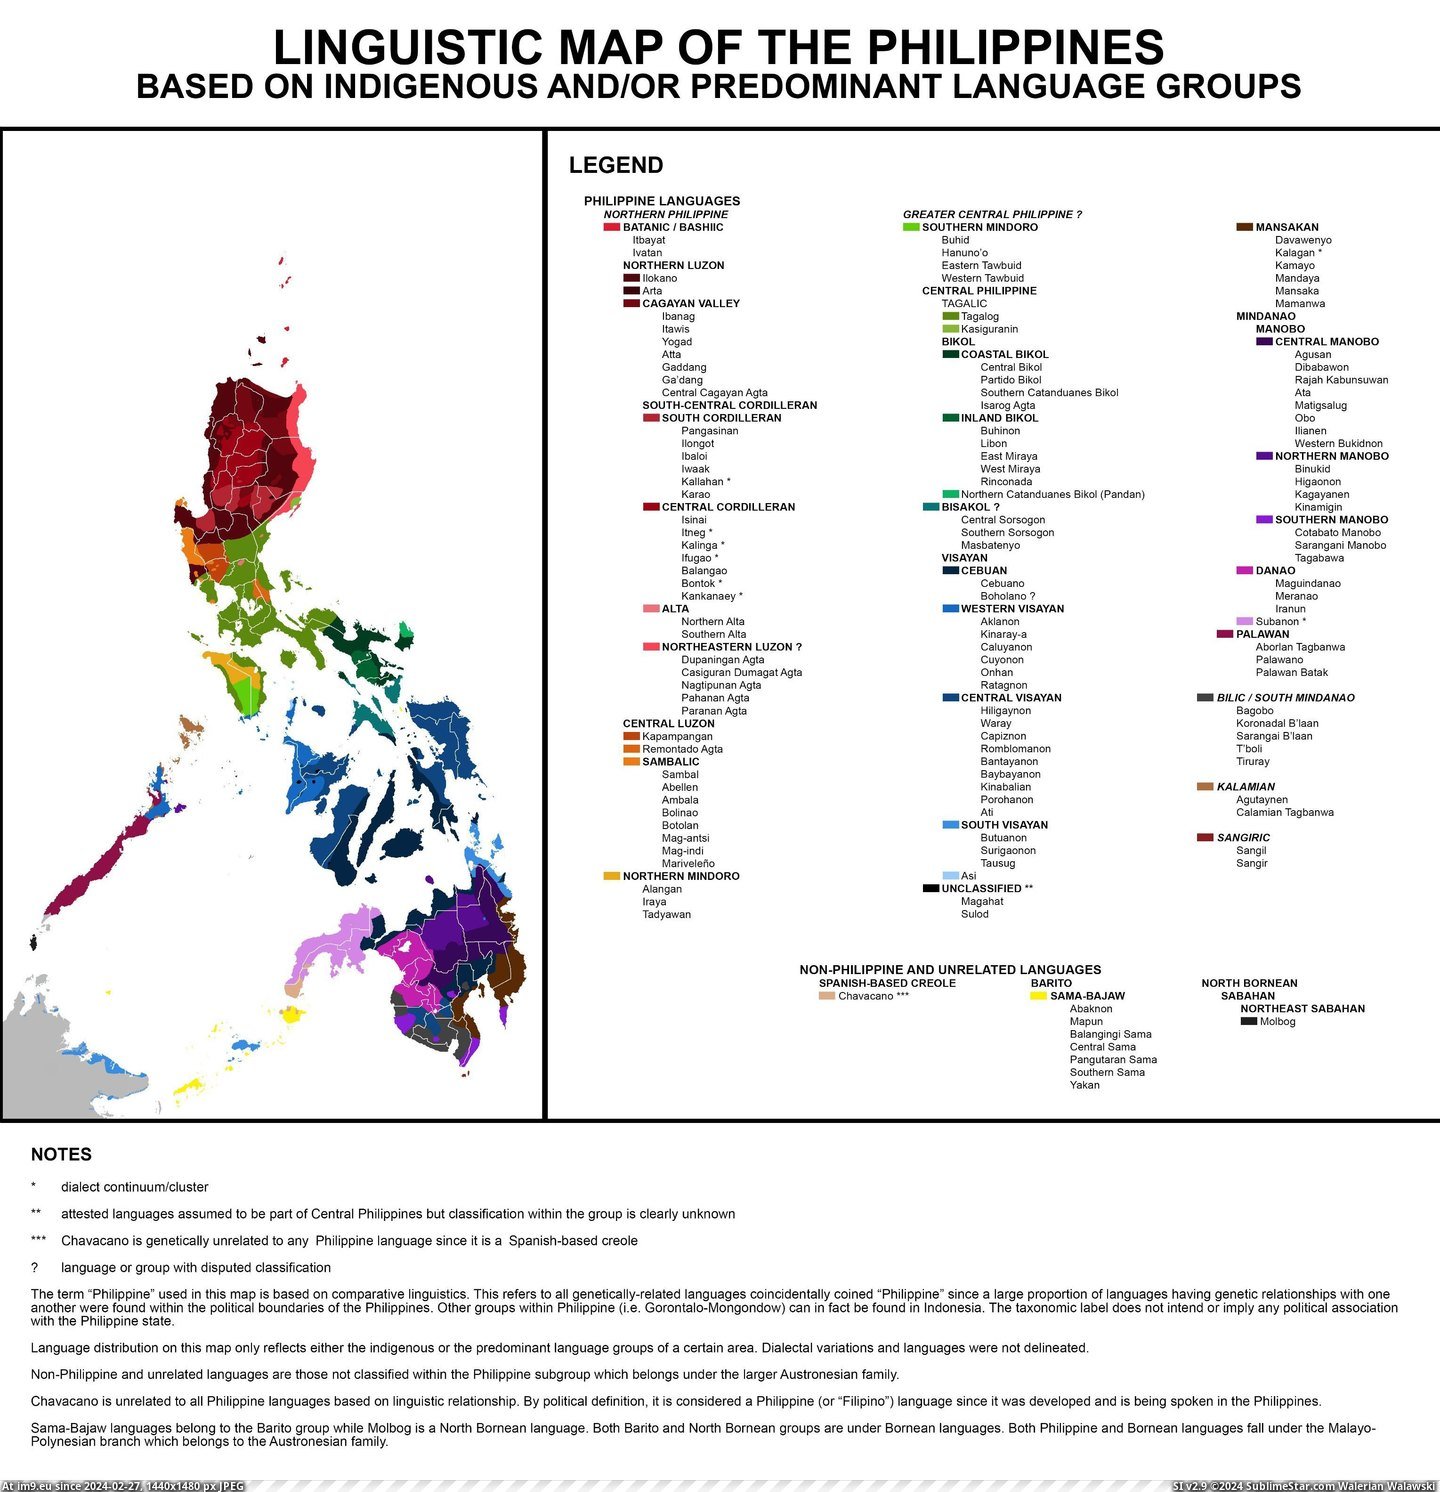 #Map #Language #Groups #Linguistic #Indigenous #Based #Philippines [Mapporn] Linguistic map of the Philippines based on indigenous and-or predominant language groups [3058x3154] (Philippines) Pic. (Image of album My r/MAPS favs))